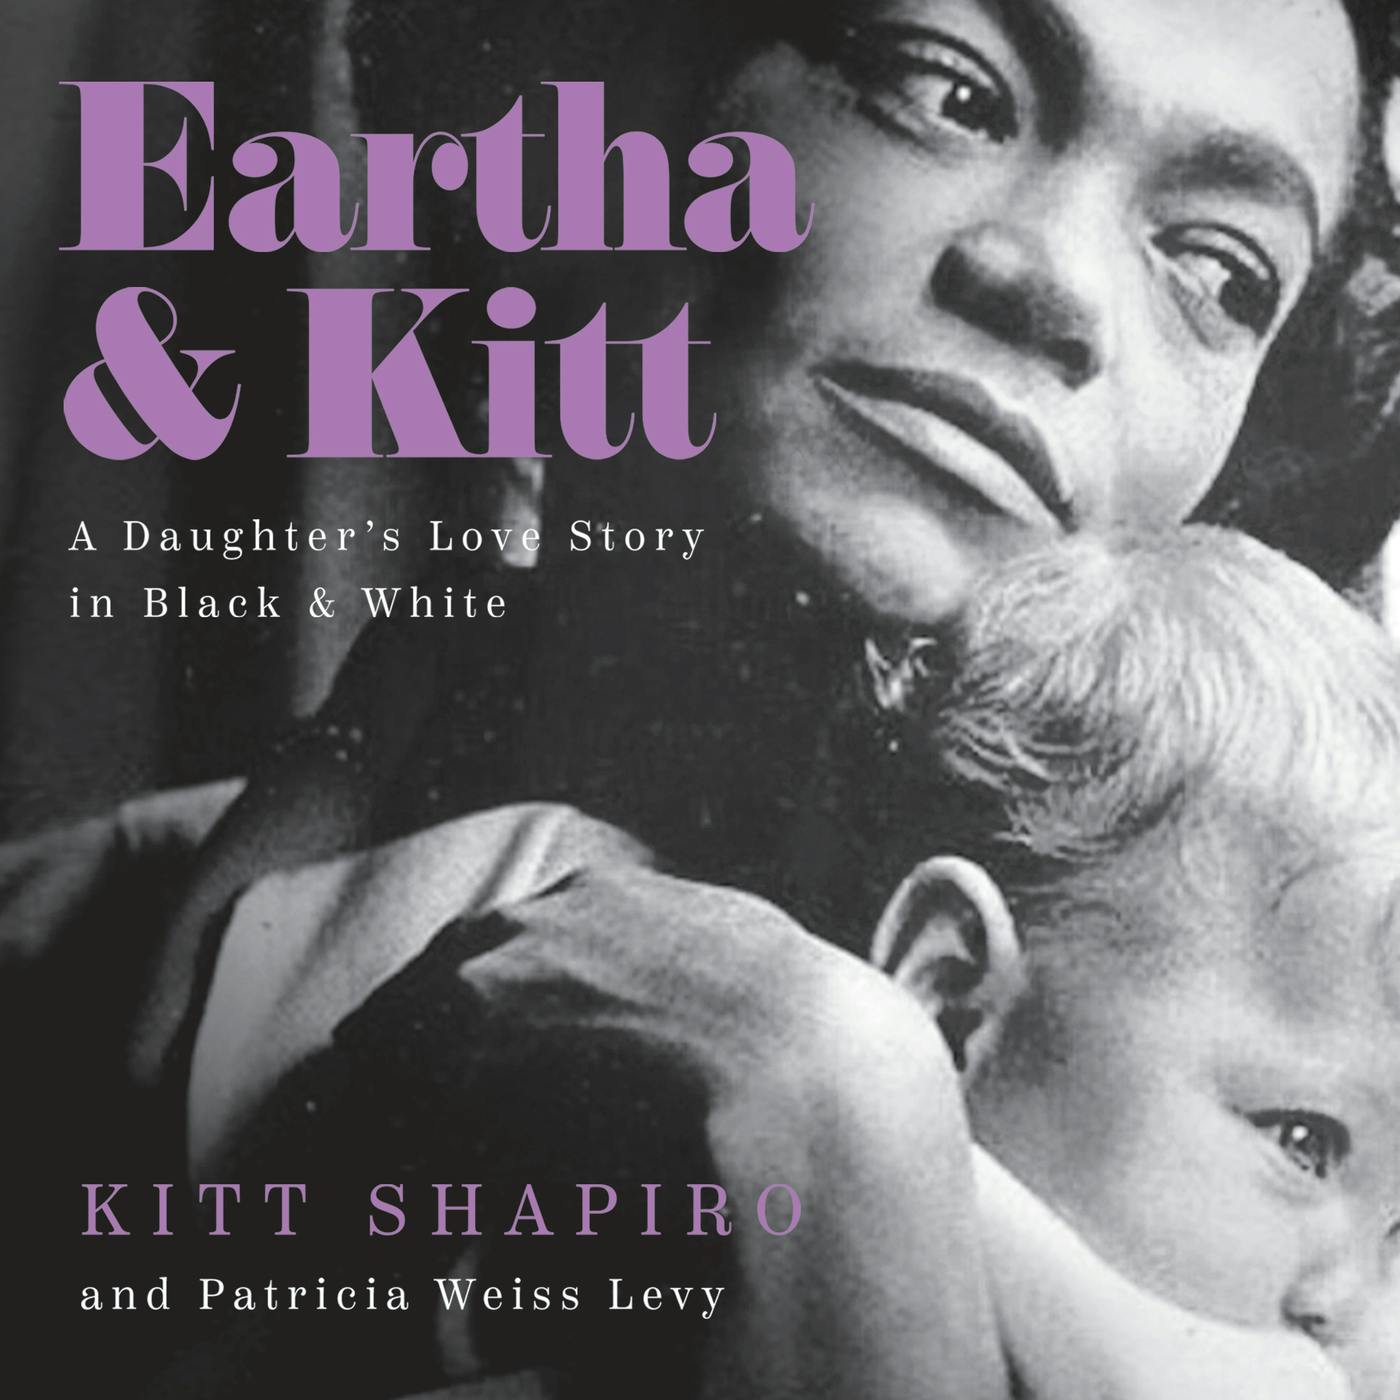 Eartha & Kitt - A Daughter's Love Story in Black and White (Unabridged) - Kitt Shapiro, Patricia Weiss Levy